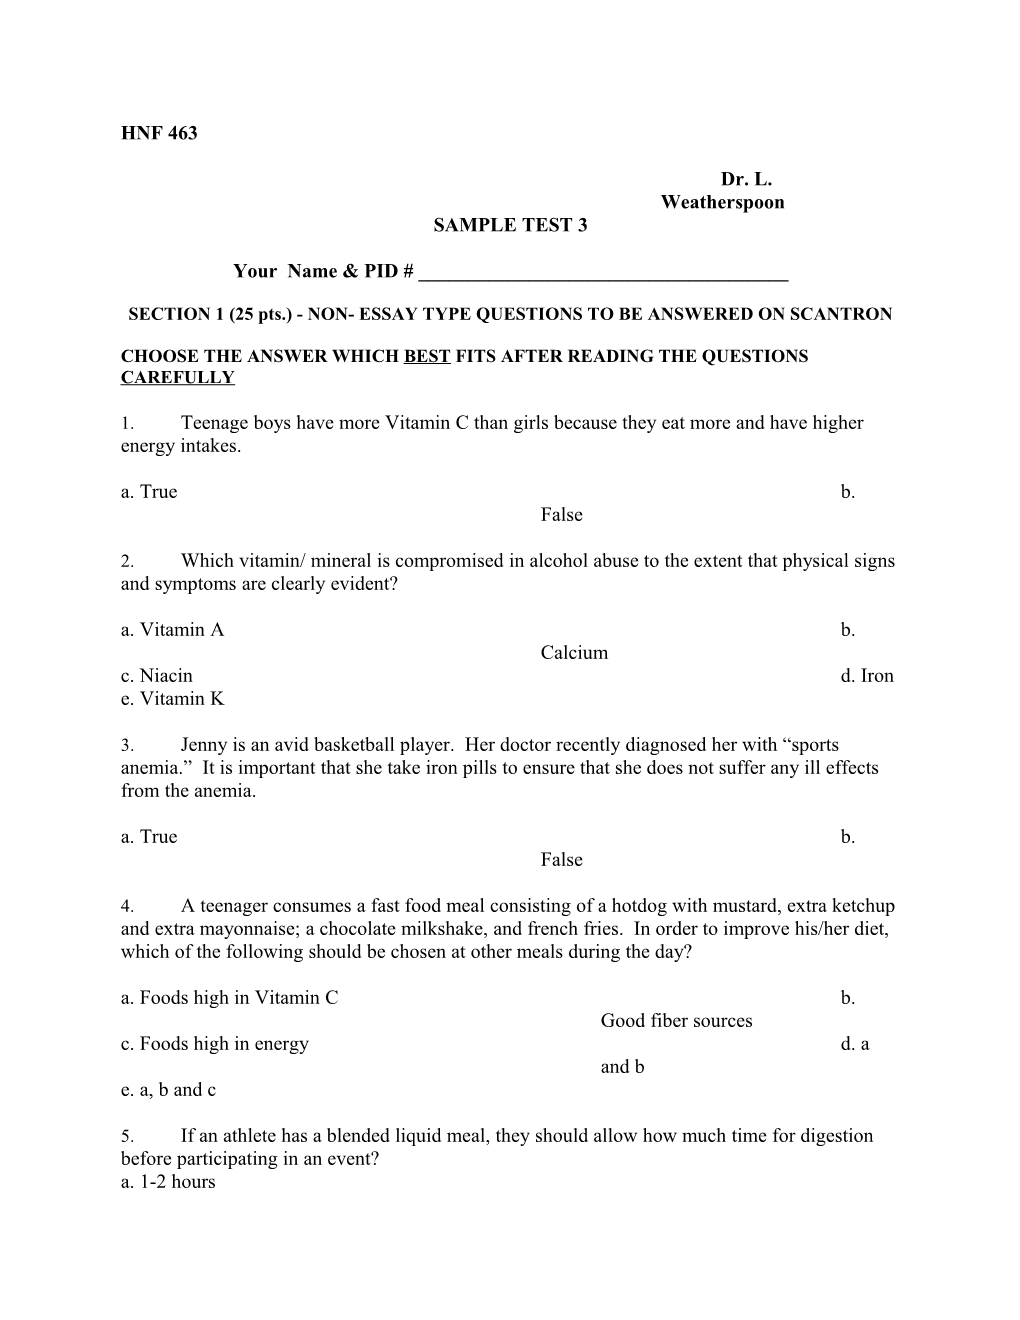 SECTION 1 (25 Pts.) - NON- ESSAY TYPE QUESTIONS to BE ANSWERED on SCANTRON